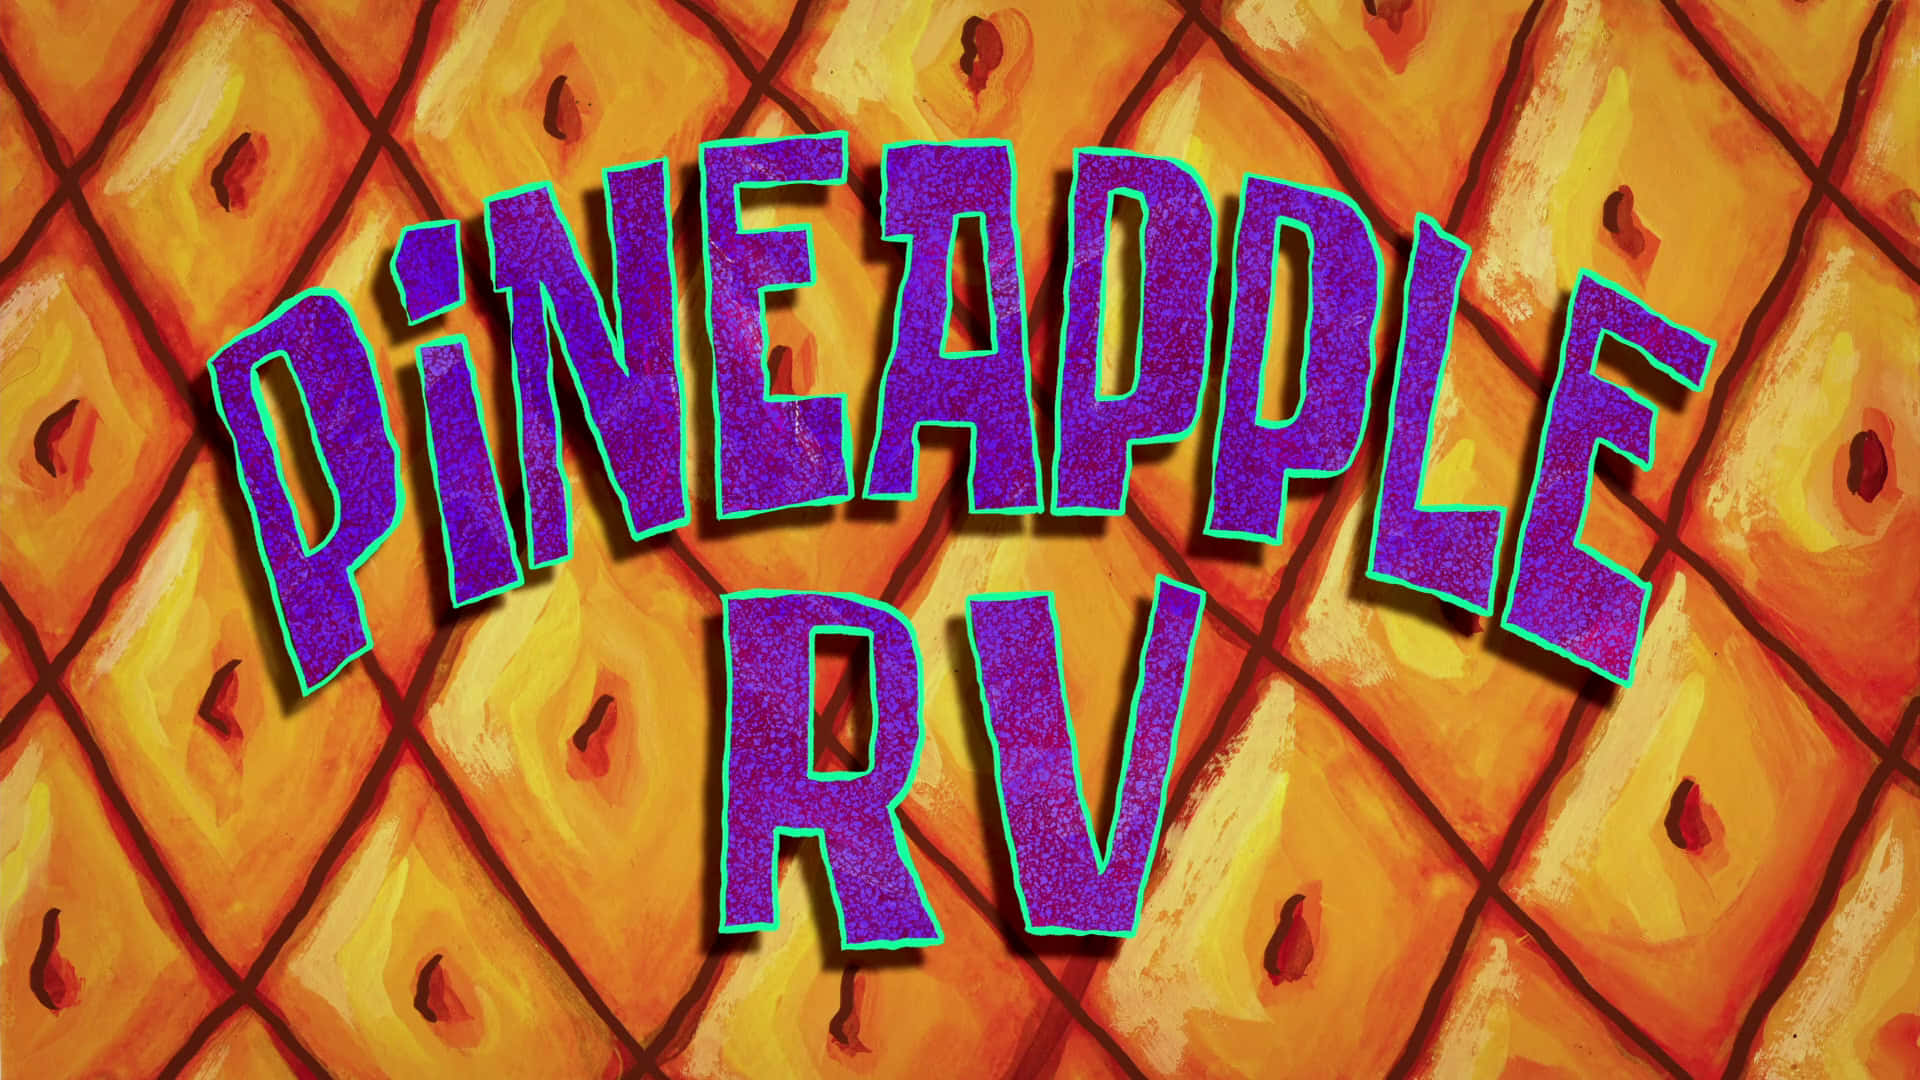 Pineapple Rv - A Colorful And Colorful Logo Wallpaper